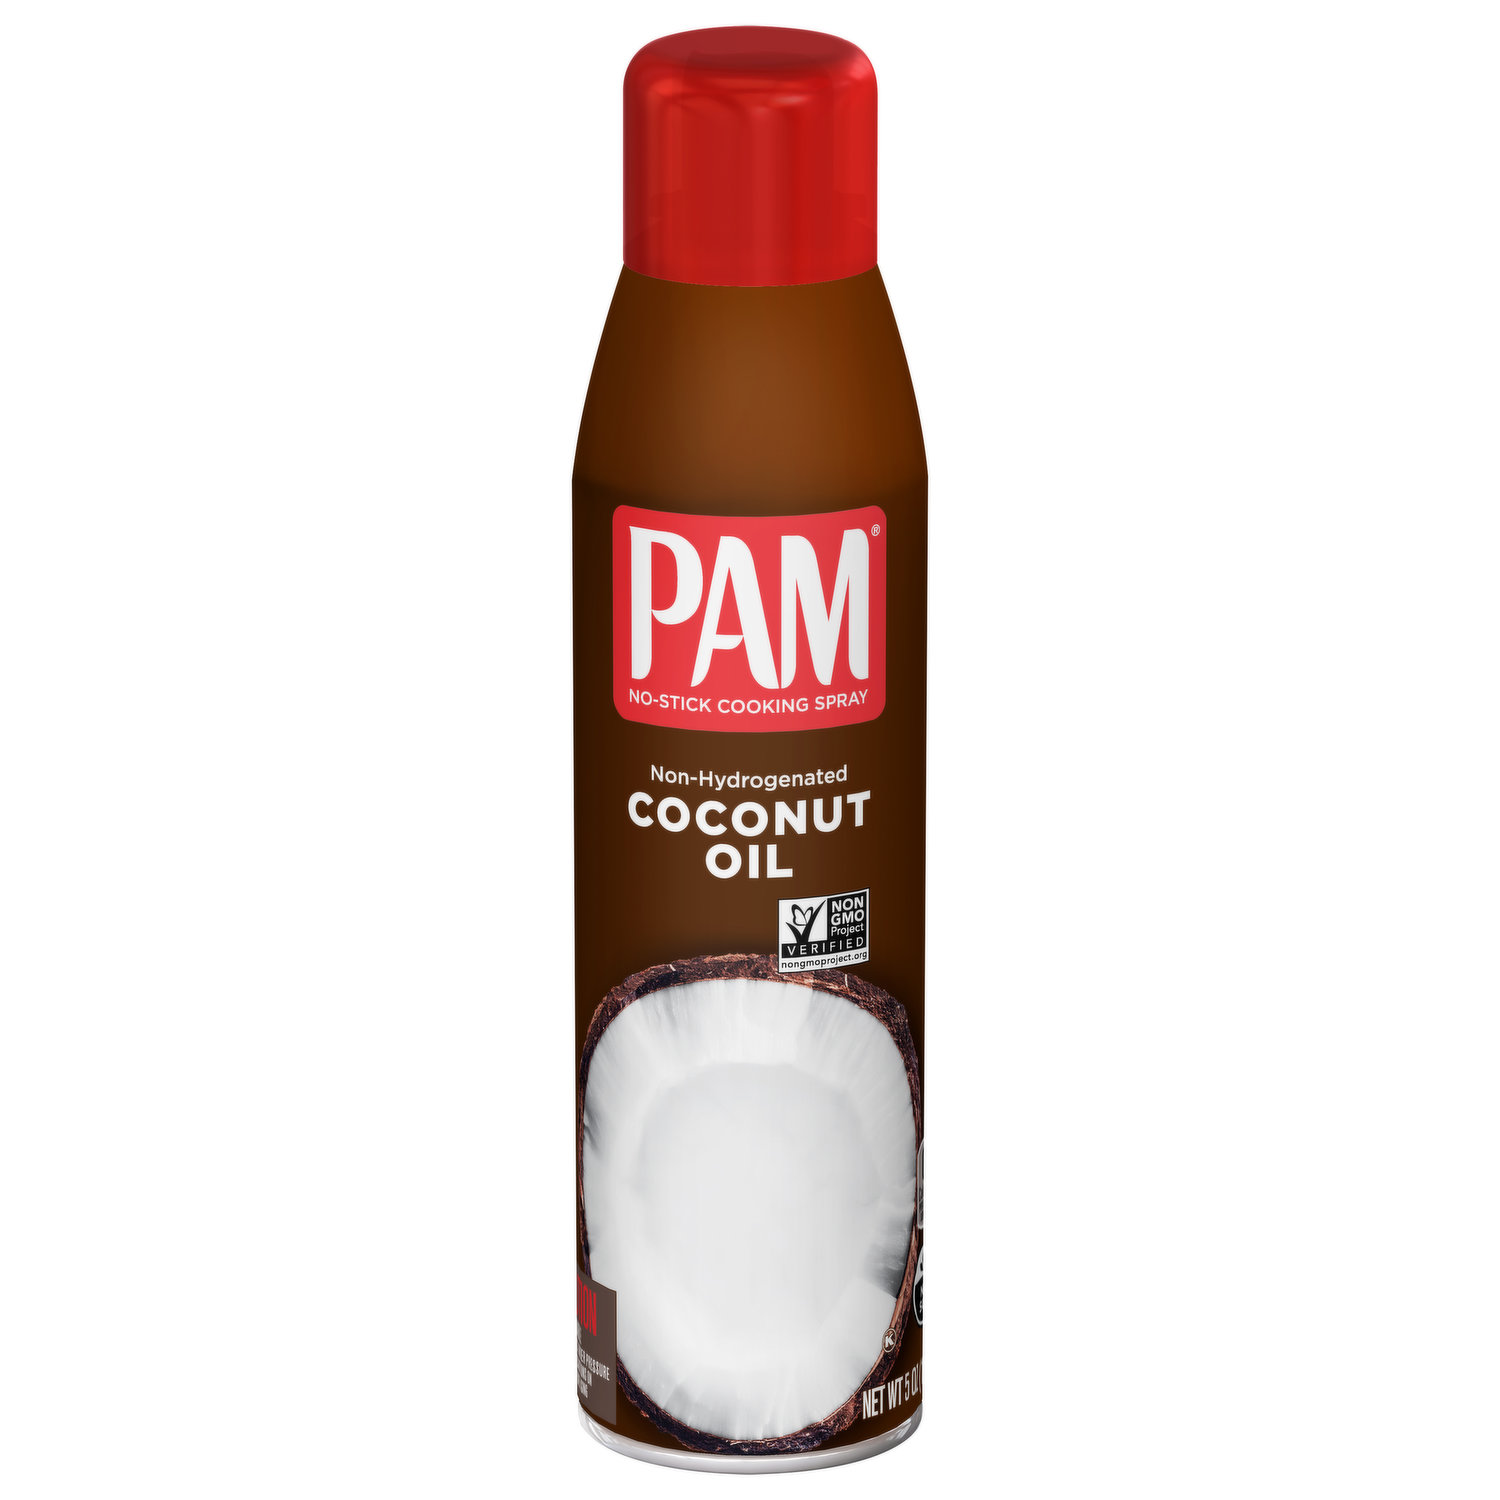 Pam No-Stick Cooking Spray - Grill - For High Temperature - Net Wt. 5 OZ  (141 g) Each - Pack of 2